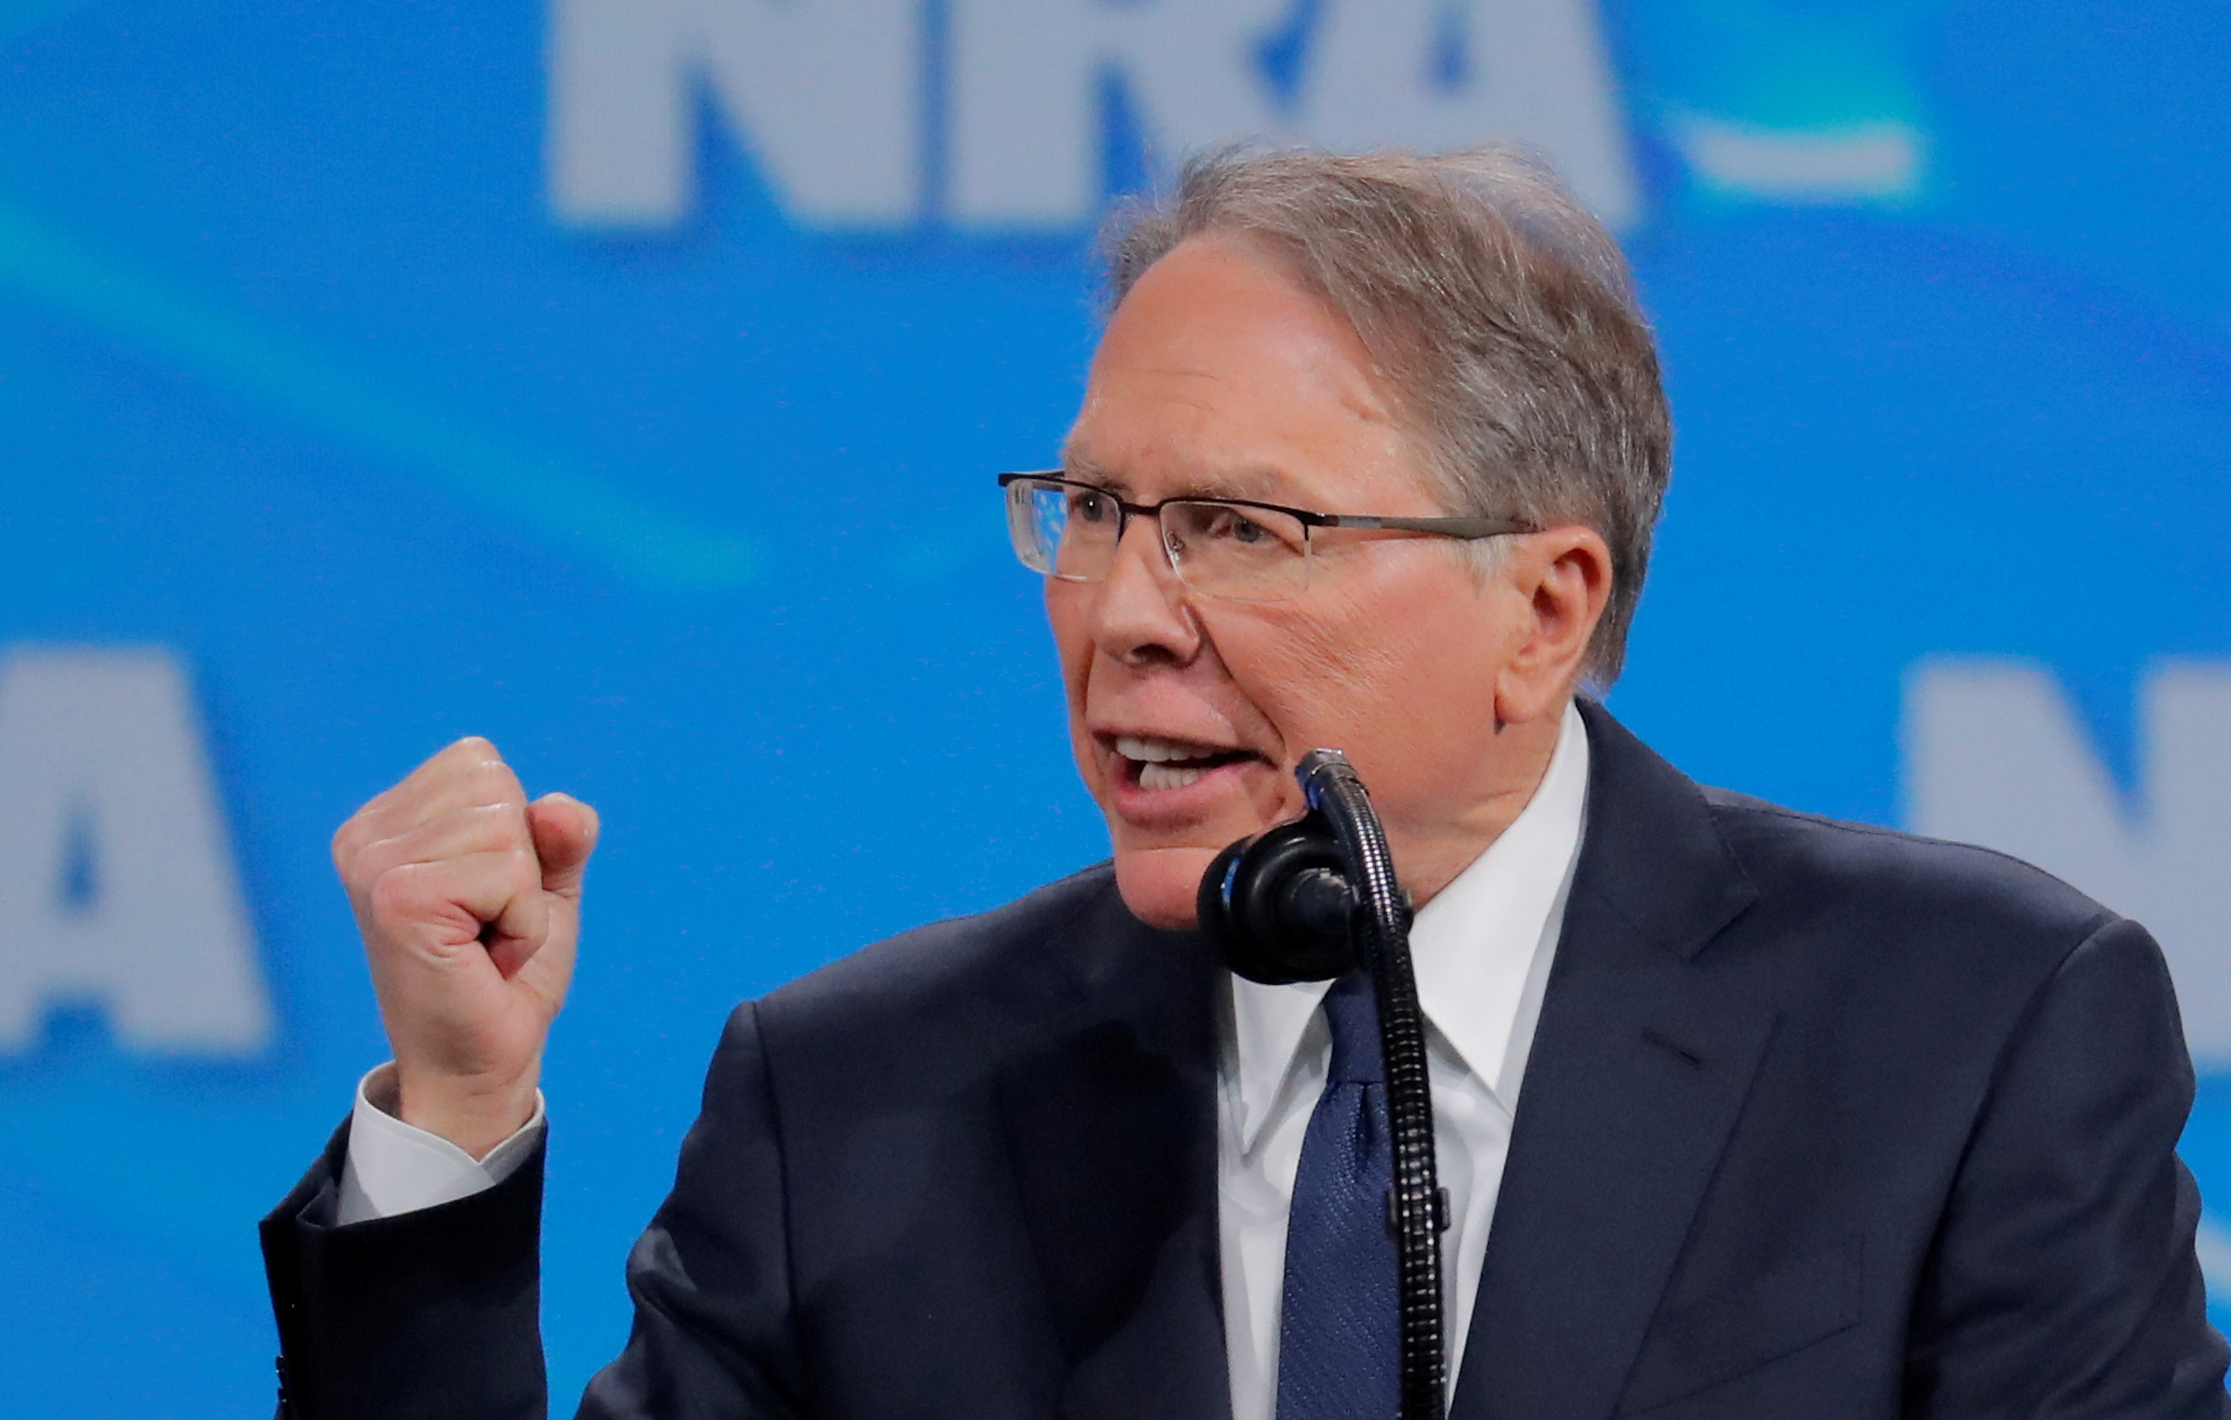 PHOTO: Wayne LaPierre, executive vice president and CEO of the National Rifle Association, speaks at the NRA annual meeting in Indianapolis, Indiana, April 26, 2019.